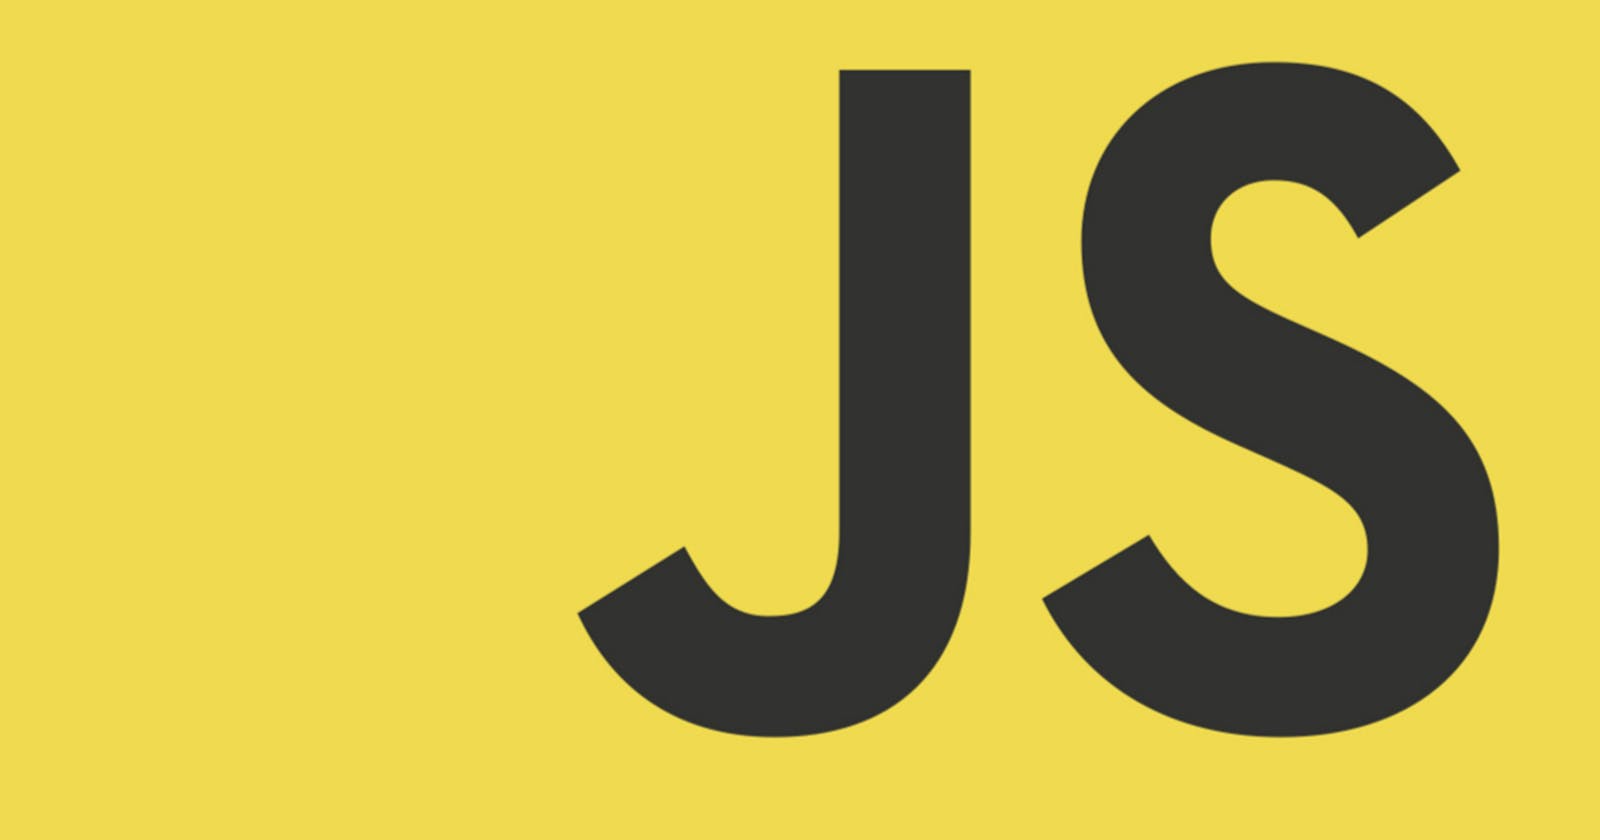 Evolution of JavaScript and its versions